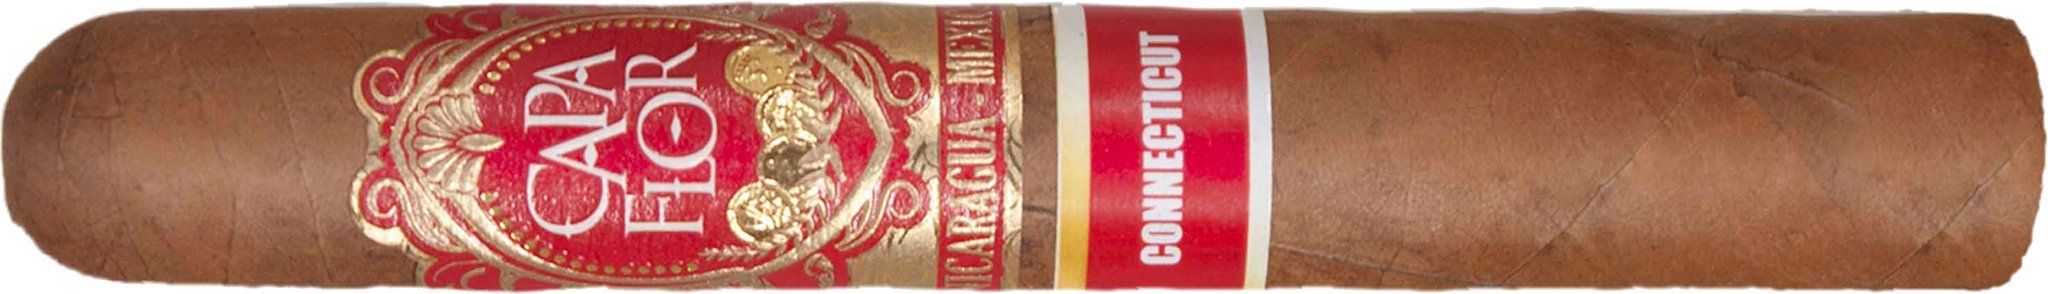 CAPA FLOR ROBUSTO CONNECTICUT (1)